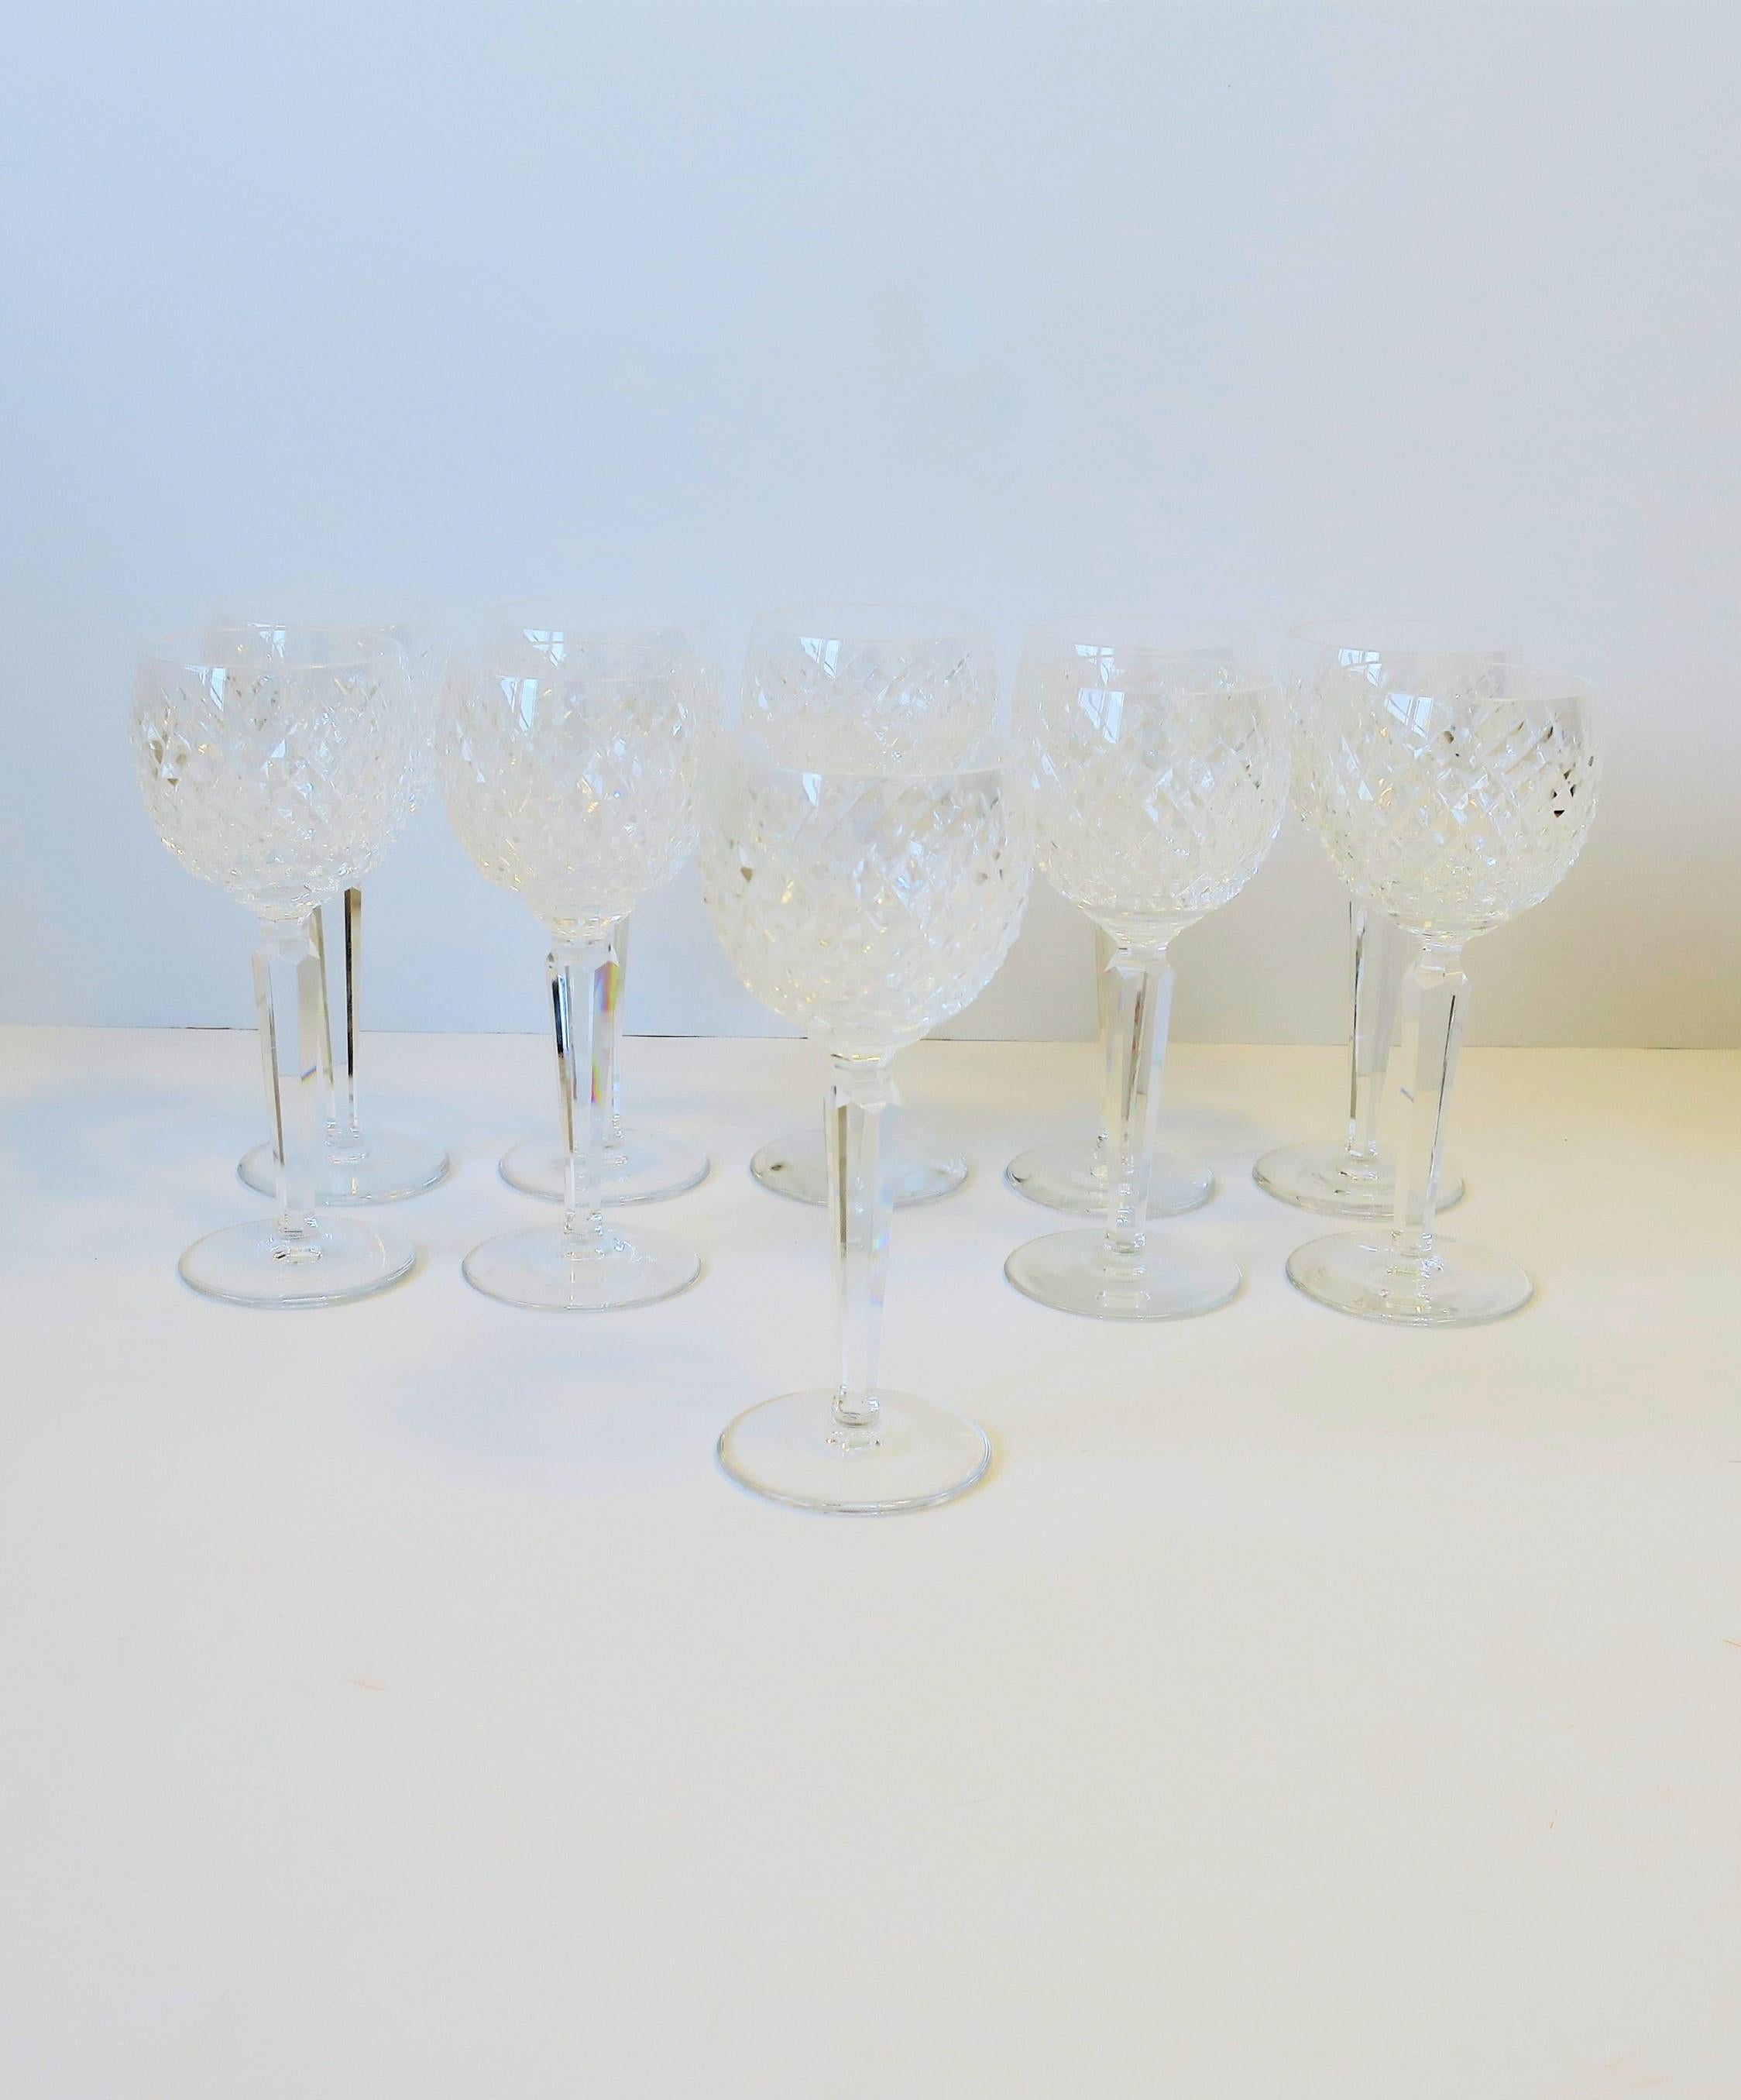 A beautiful and substantial set of 10 vintage Waterford crystal wine, Champagne, or water goblet glasses with a 'Diamond' pattern design, circa 20th century, Ireland. Crystal glasses have a nice weight to them, with each measuring 7.5